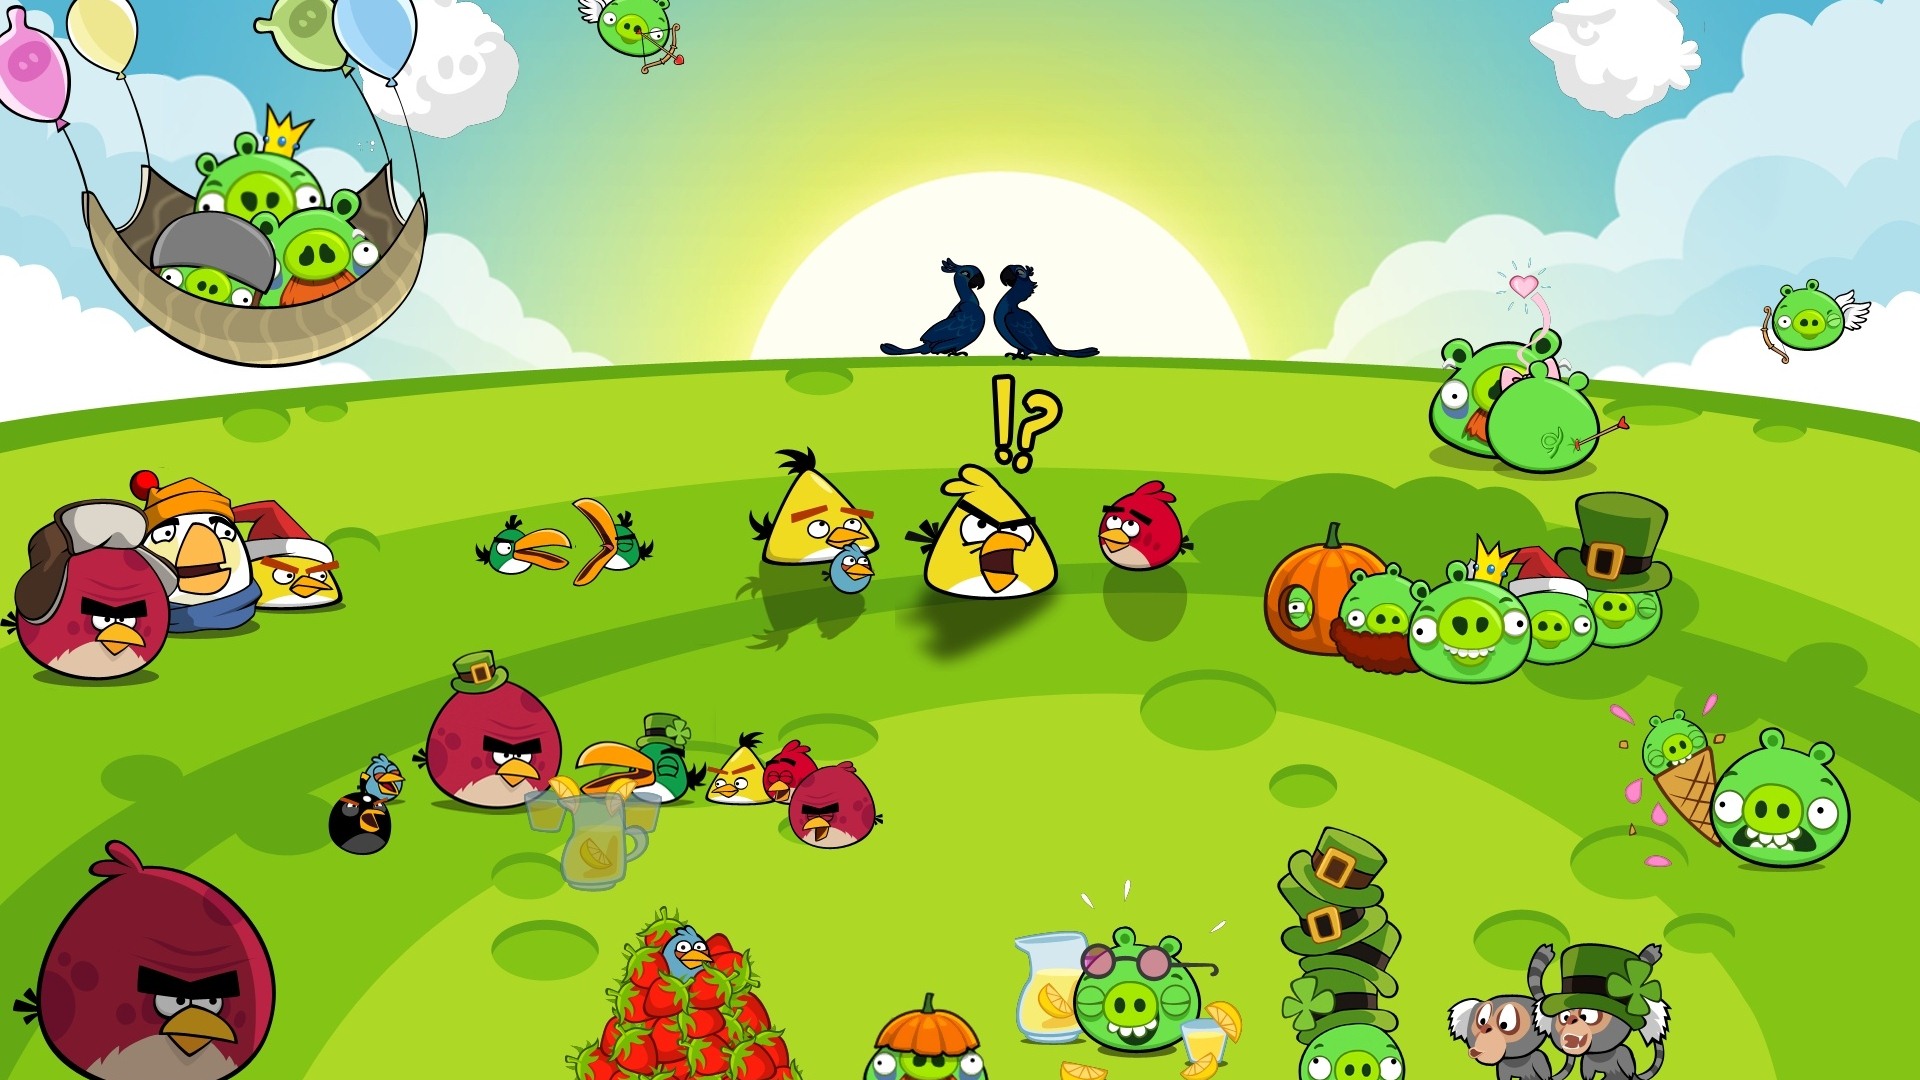 Angry Birds Spiel wallpapers #11 - 1920x1080